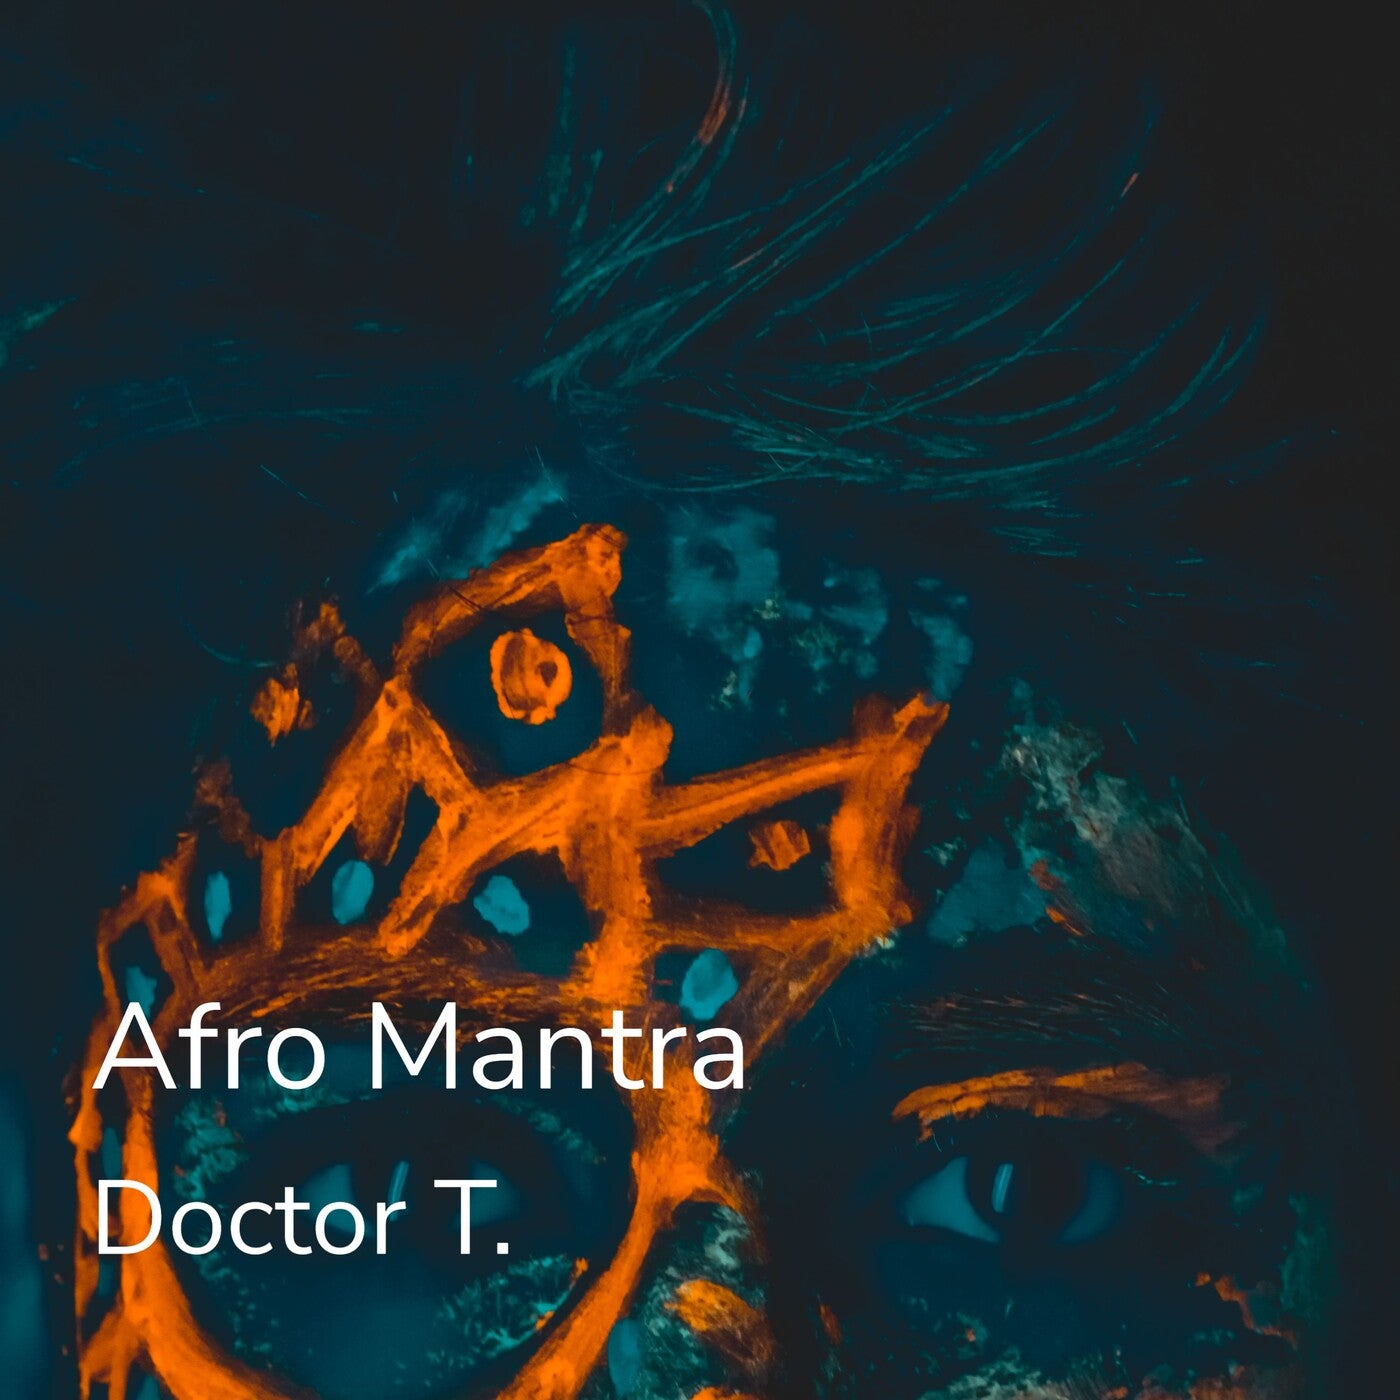 Afro Mantra